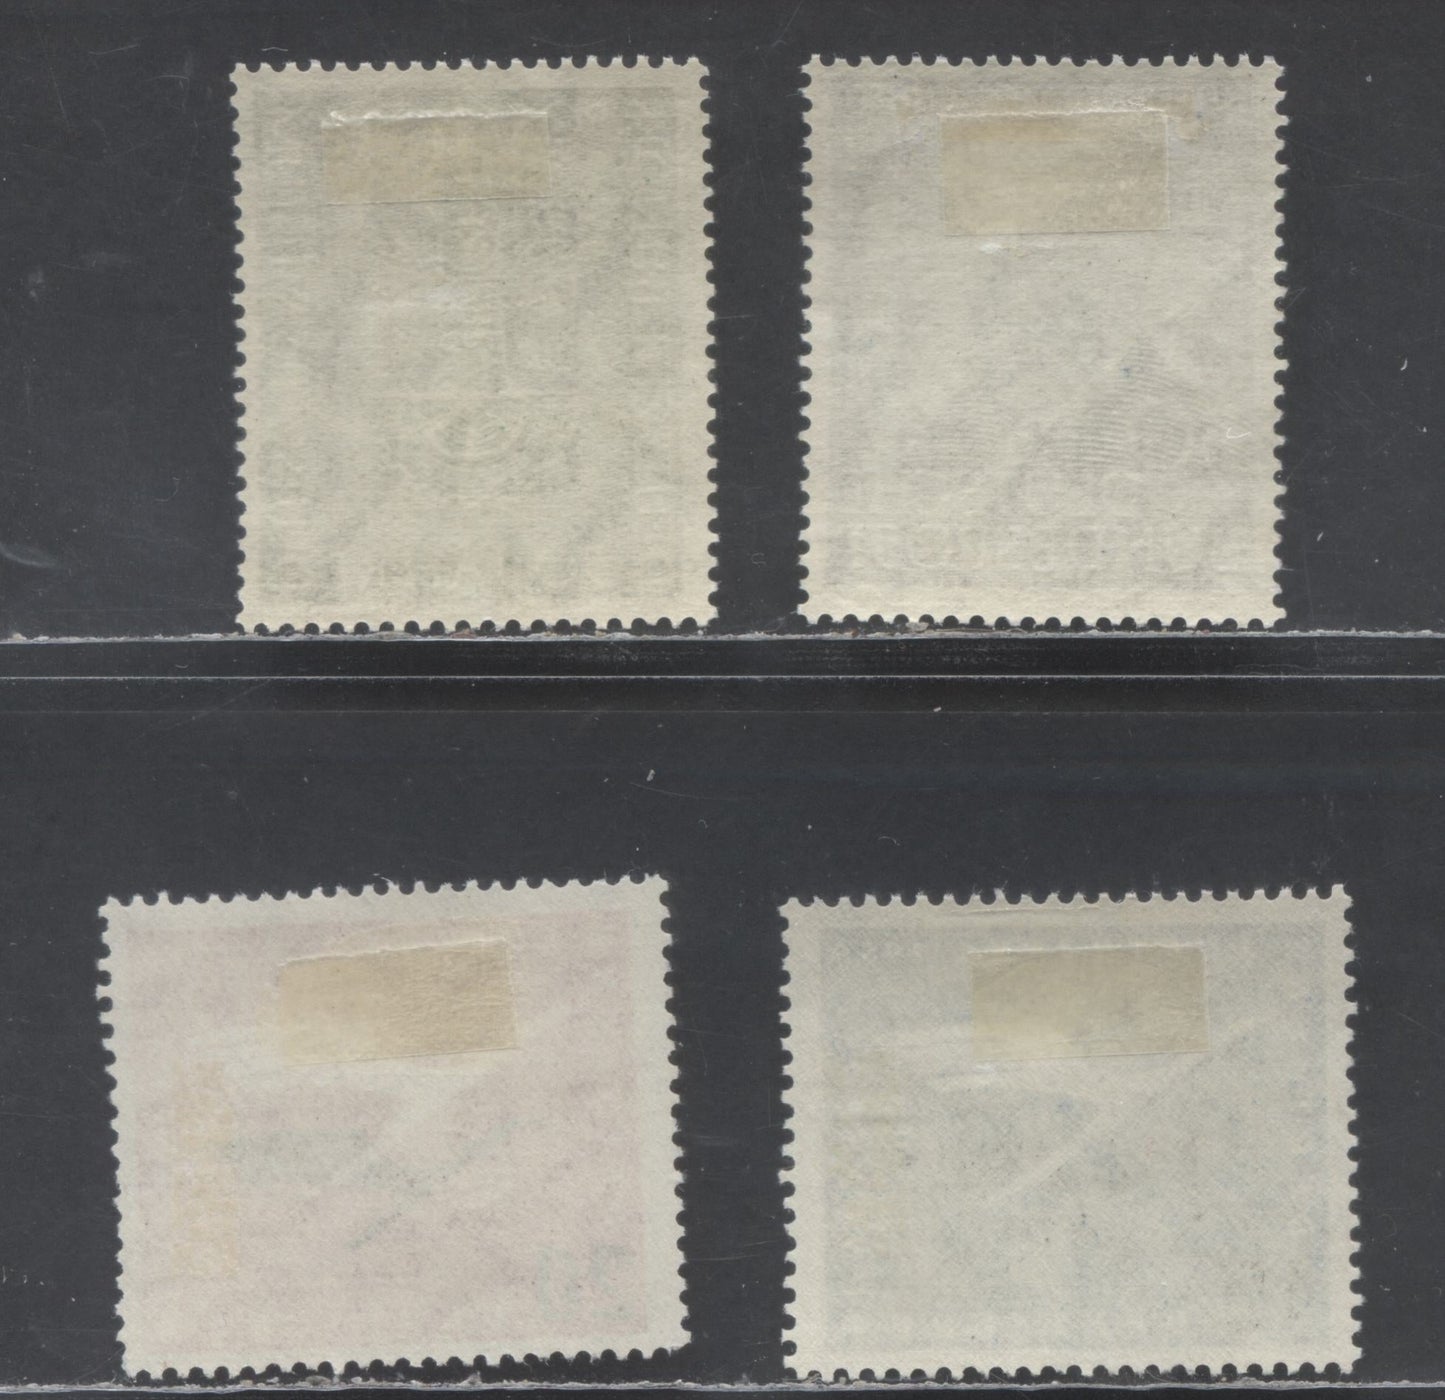 Lot 30 Germany SC#B331/C64 1953-1955 50th Anniversary Of German Museum At Munich - Re-Opening Of German Air Service Issues, 4 F/VFOG Singles, Click on Listing to See ALL Pictures, Estimated Value $25